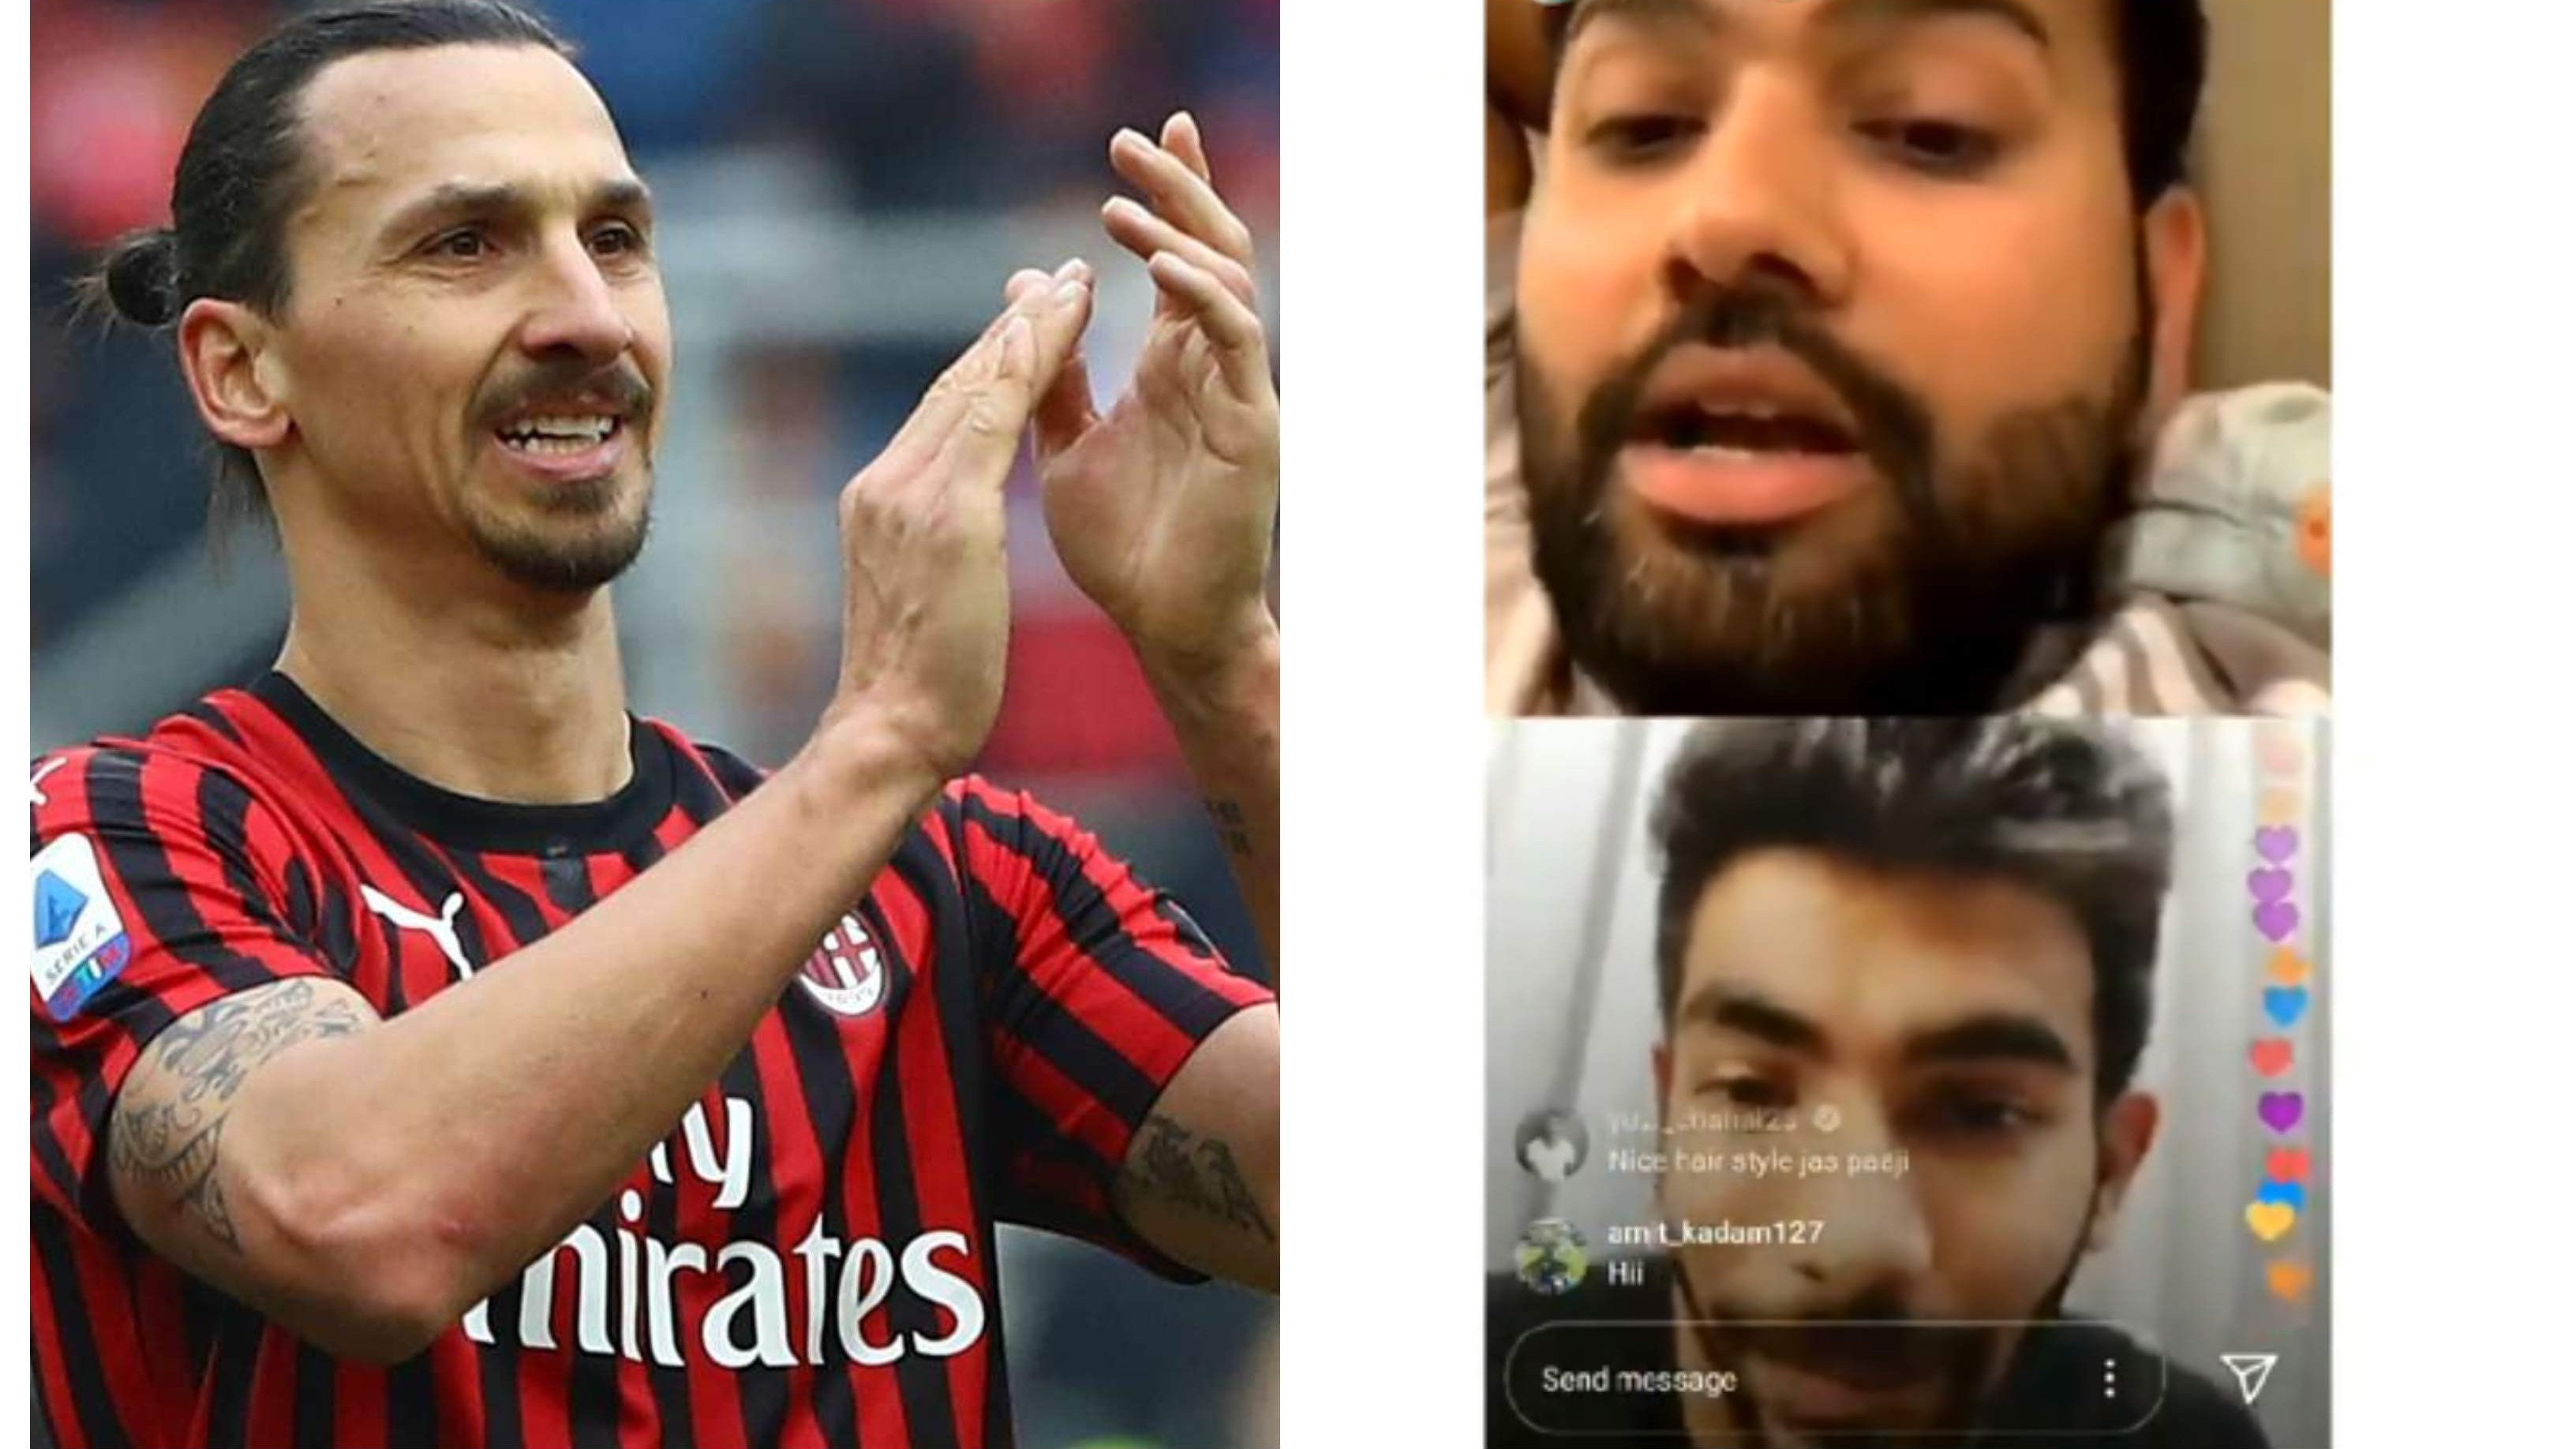 Bumrah reveals his admiration for footballer Zlatan Ibrahimovic during Instagram Live with Rohit